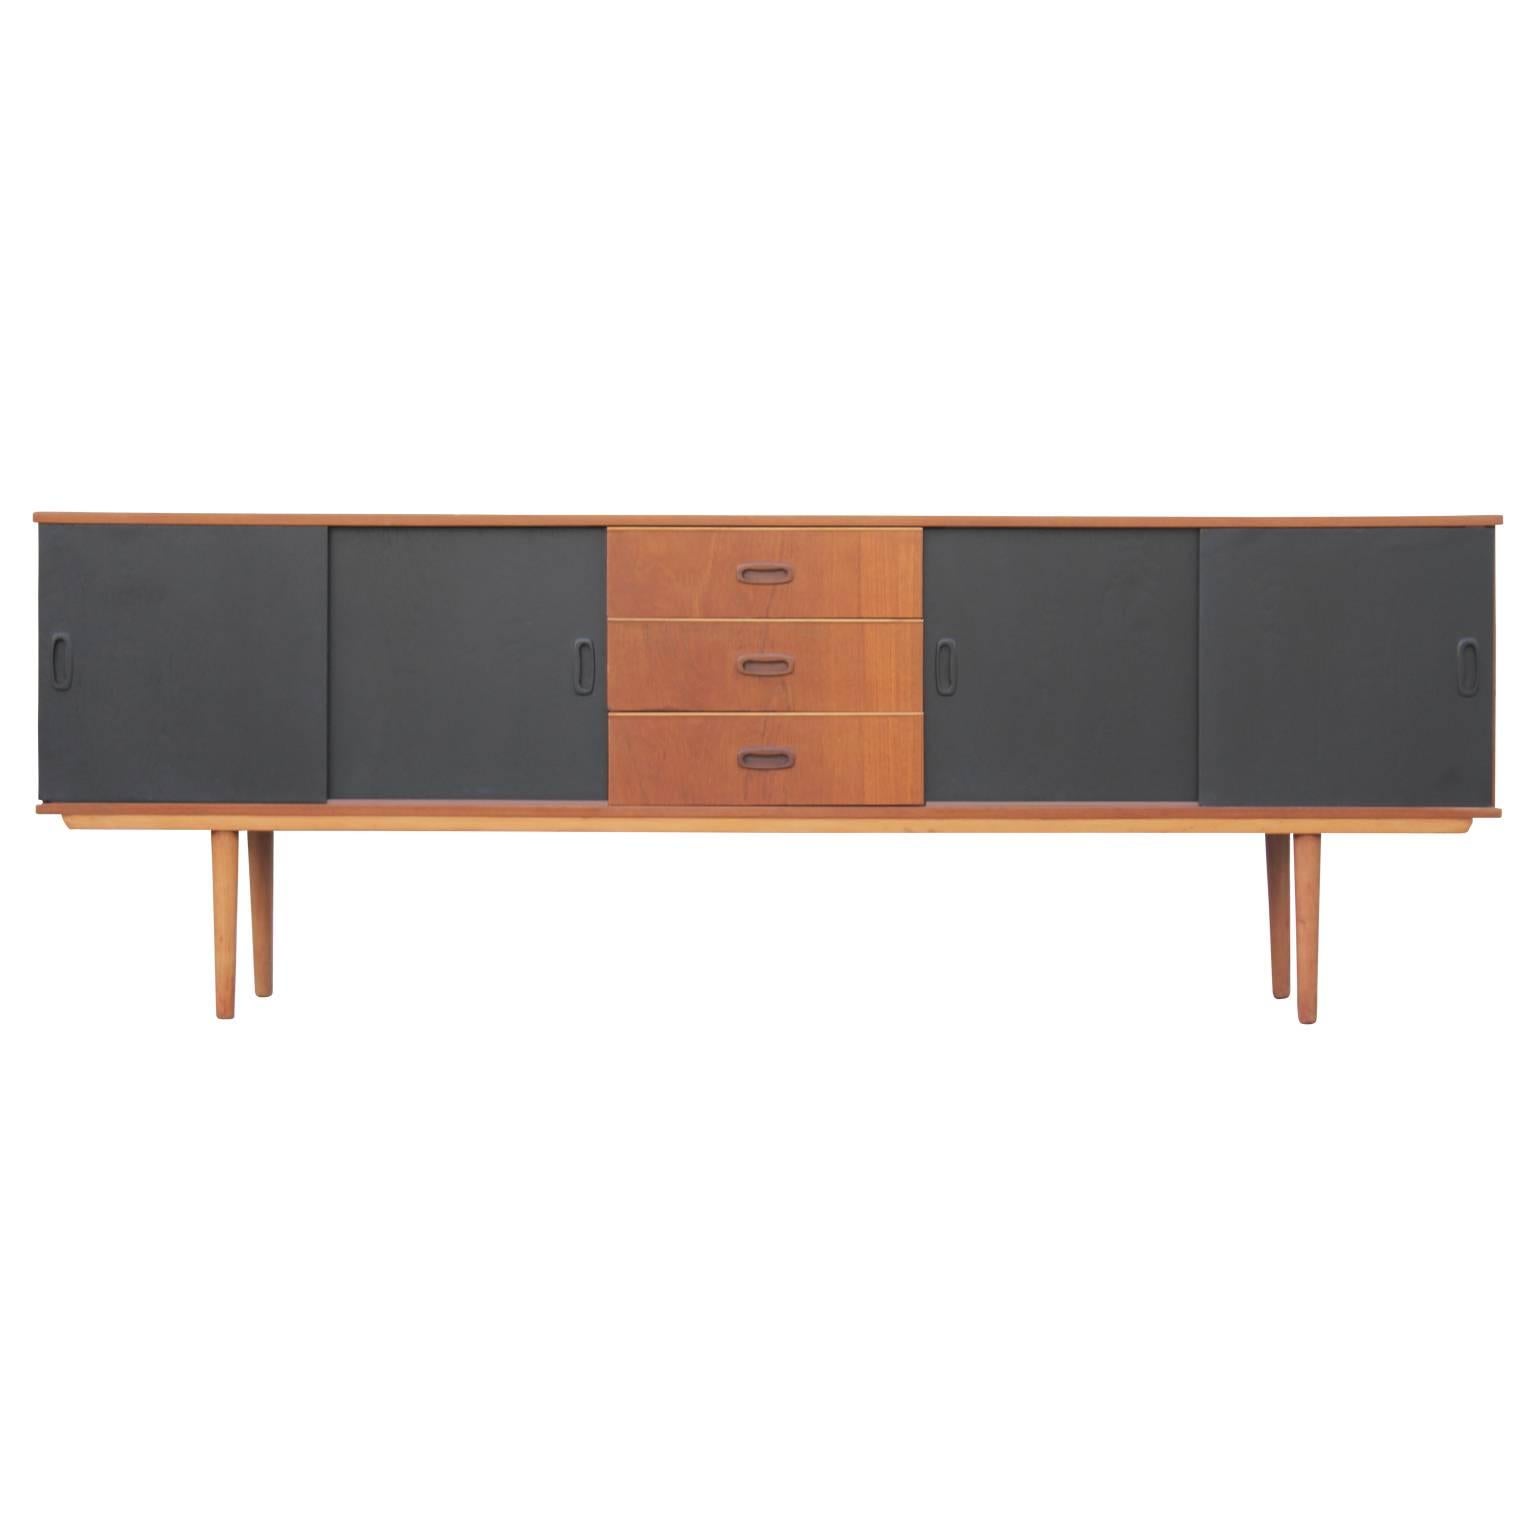 Mid-Century Modern two-tone credenza or side board with three drawers and sliding doors. The panel on the left opens to reveal an open cabinet space while the panel on the right opens to reveal a single shelf.